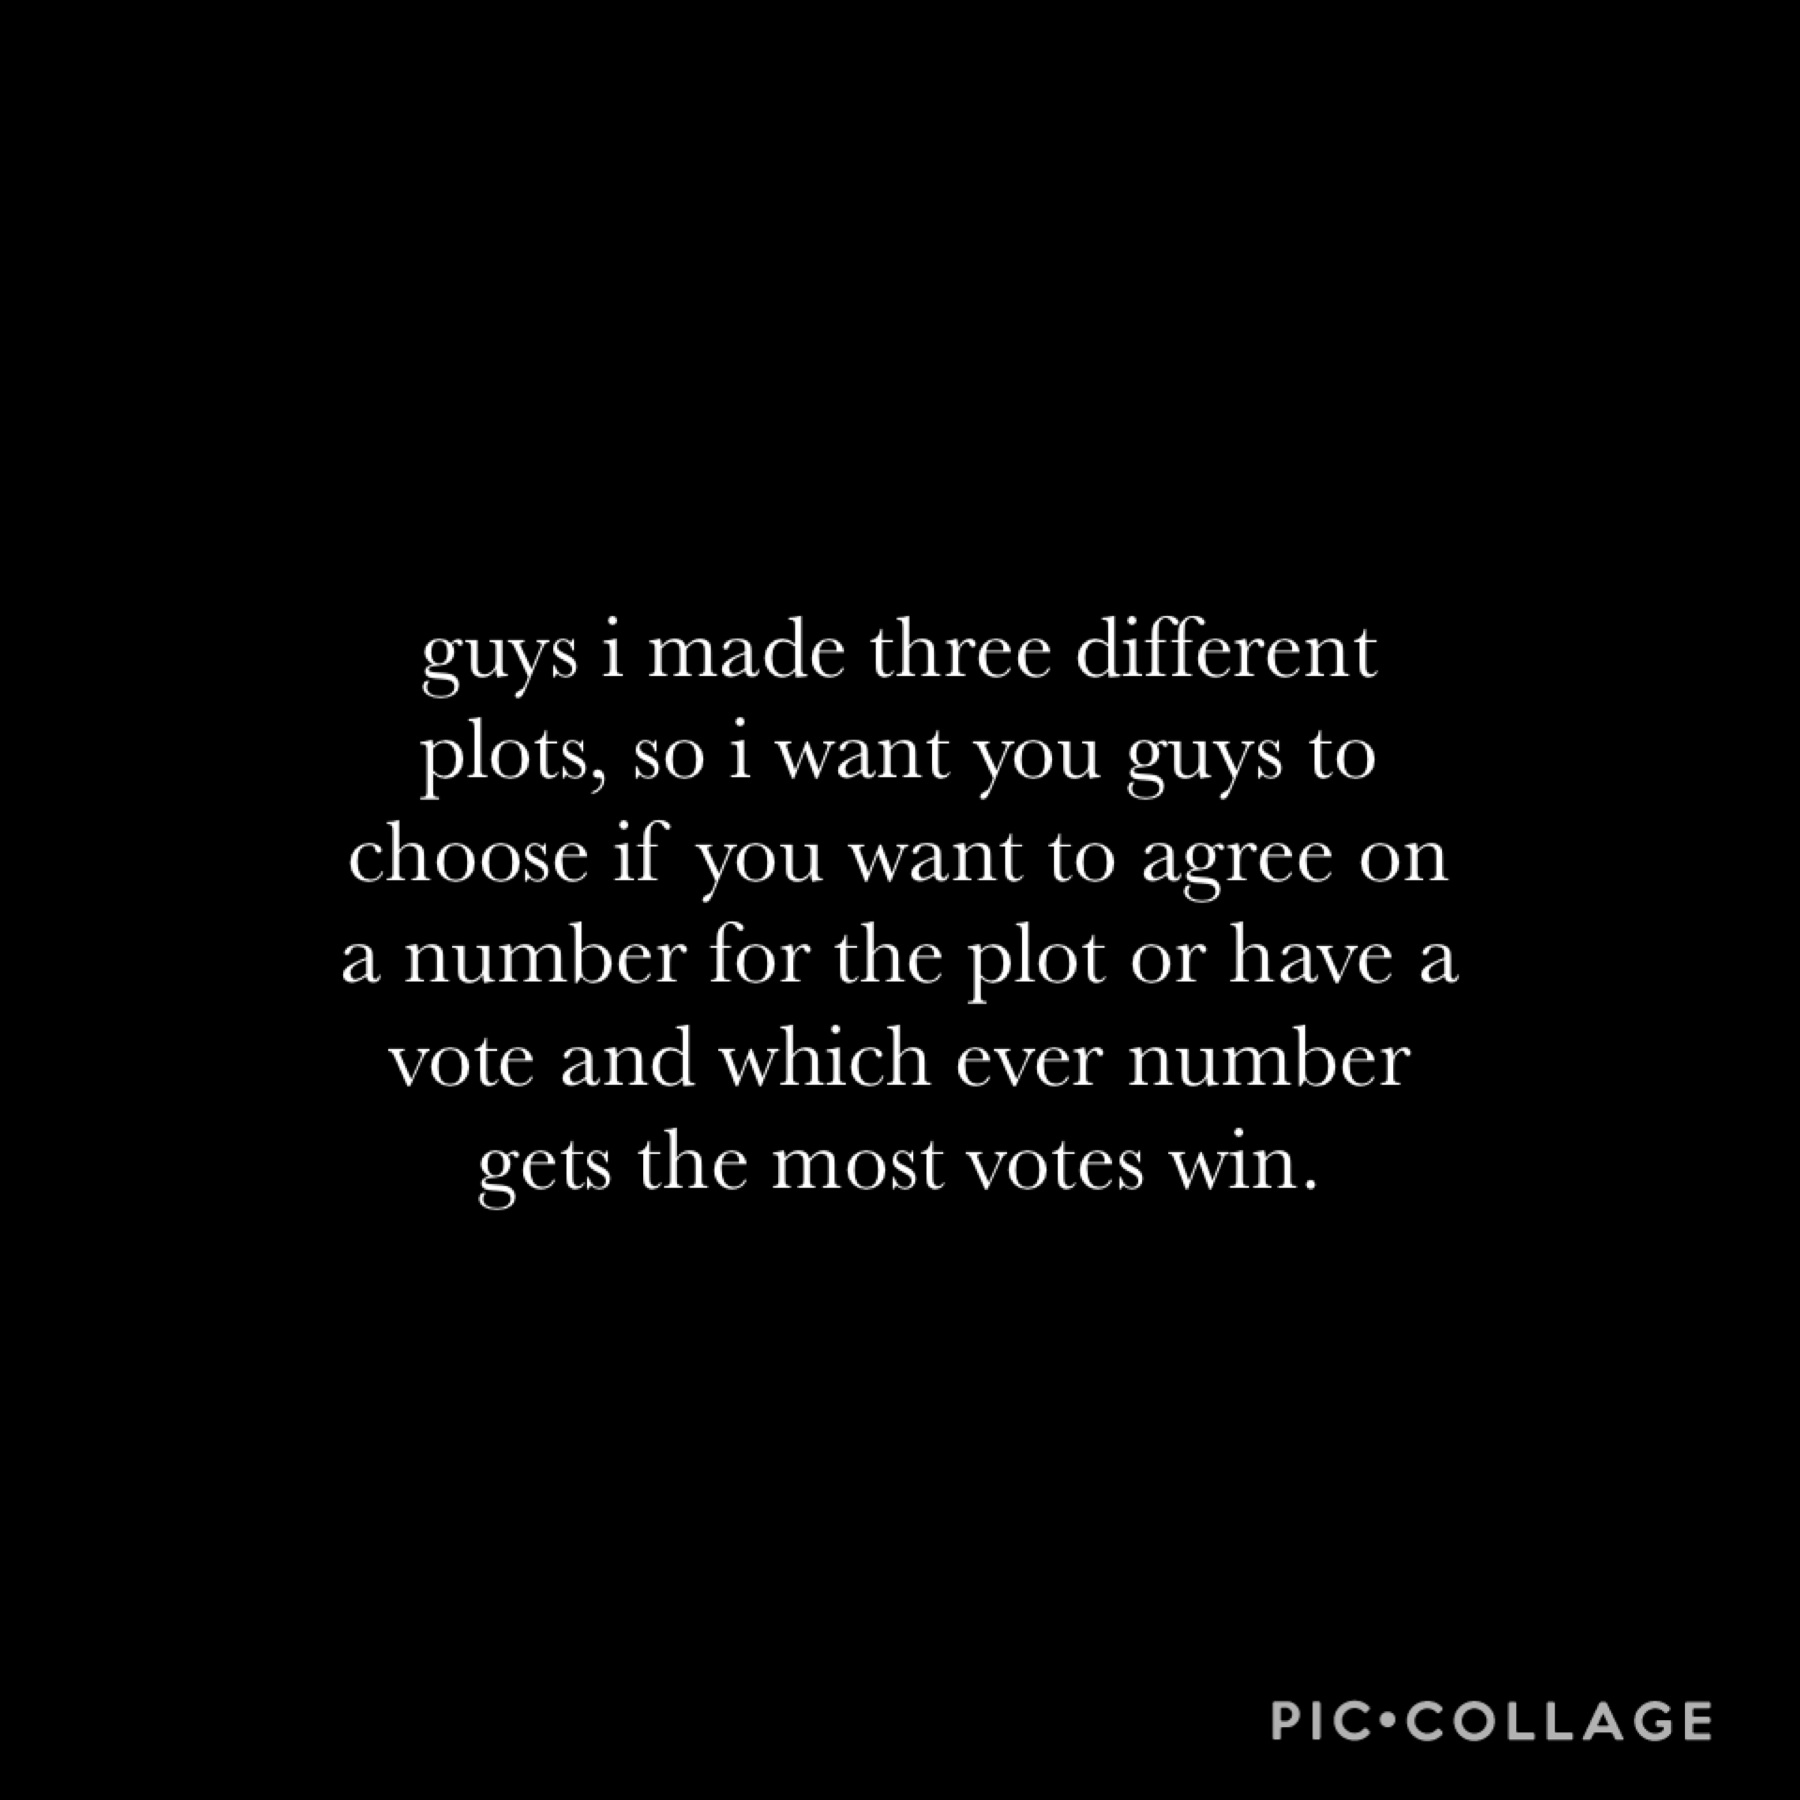 so pretty much tell me which way you prefer and then i’ll ask for you guys to pick your number and we get ourselves a plot :)